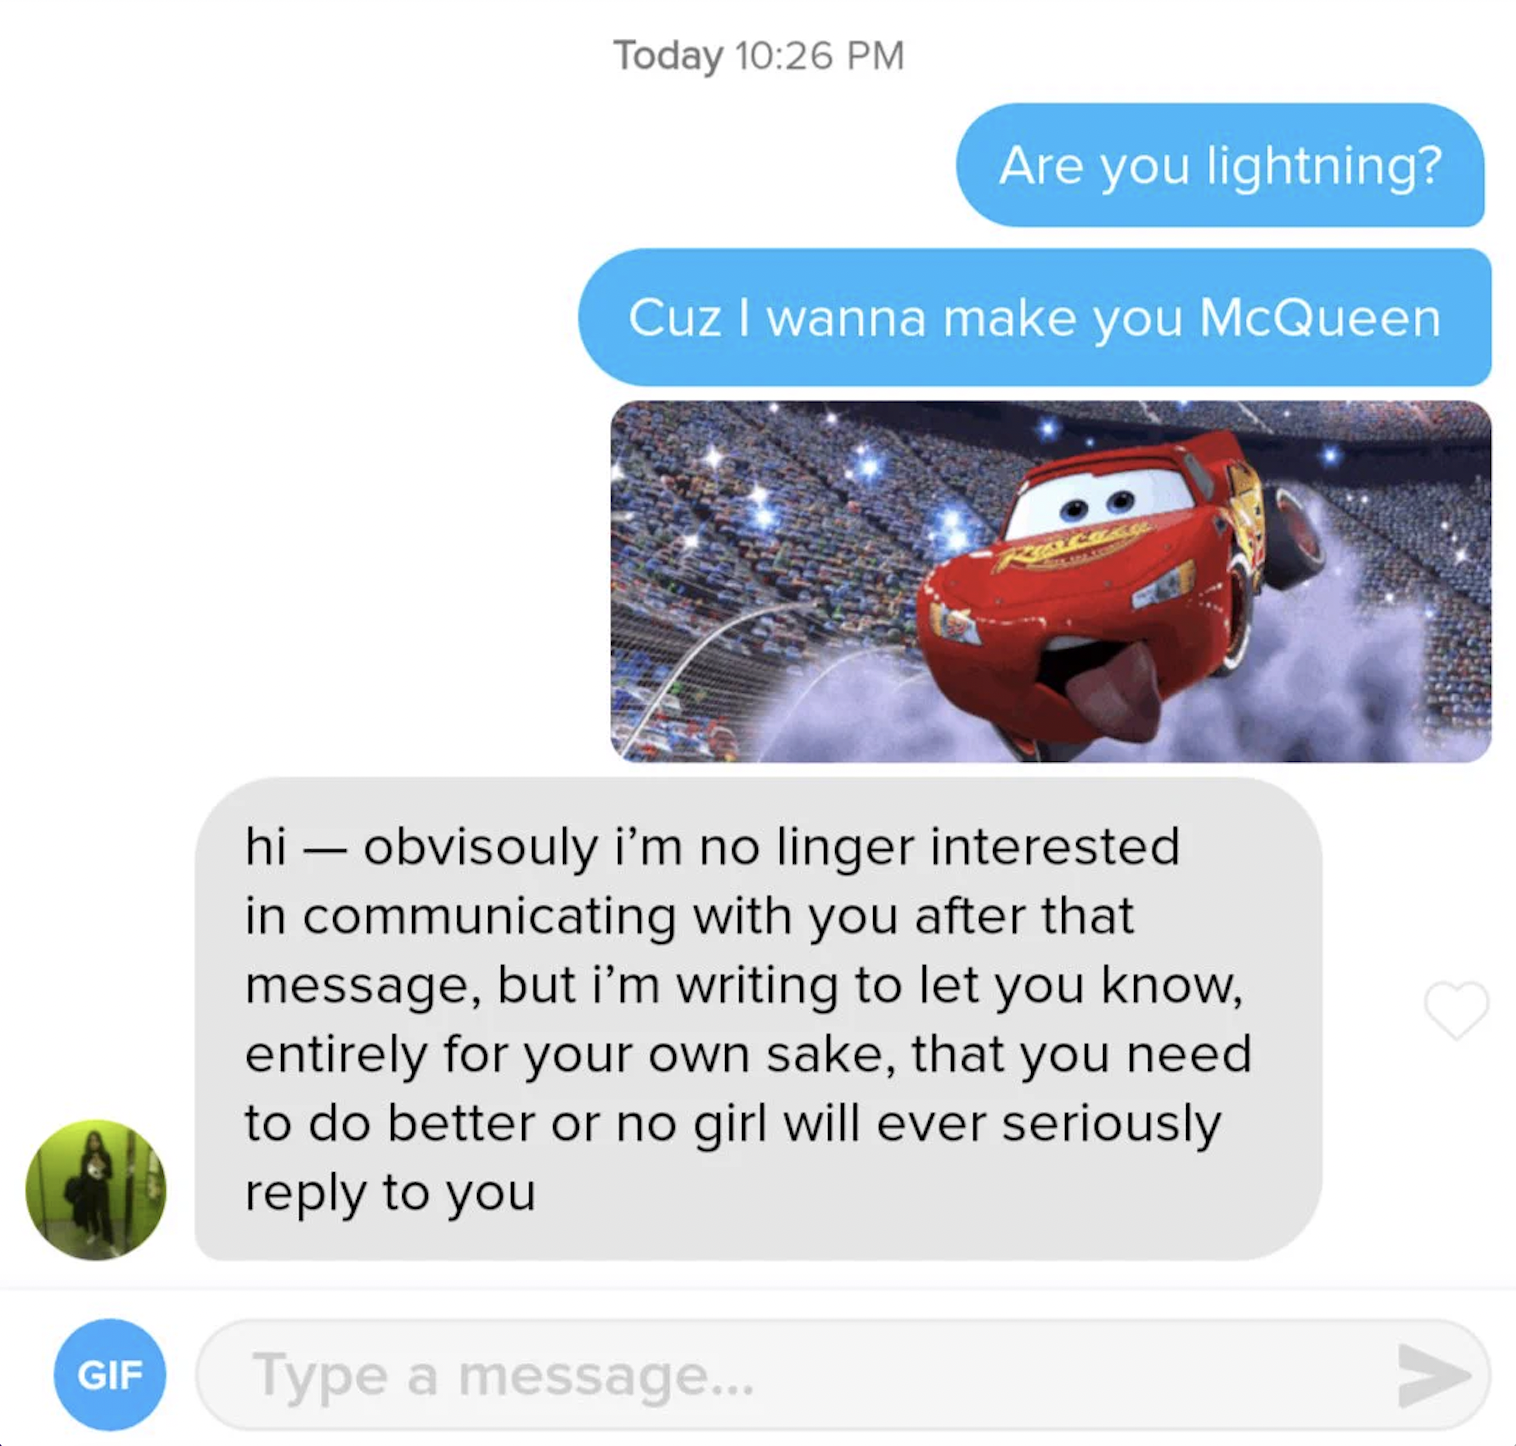 lightning mcqueen pick up lines - Gif Today Are you lightning? Cuz I wanna make you McQueen hi obvisouly i'm no linger interested in communicating with you after that message, but i'm writing to let you know, entirely for your own sake, that you need to d